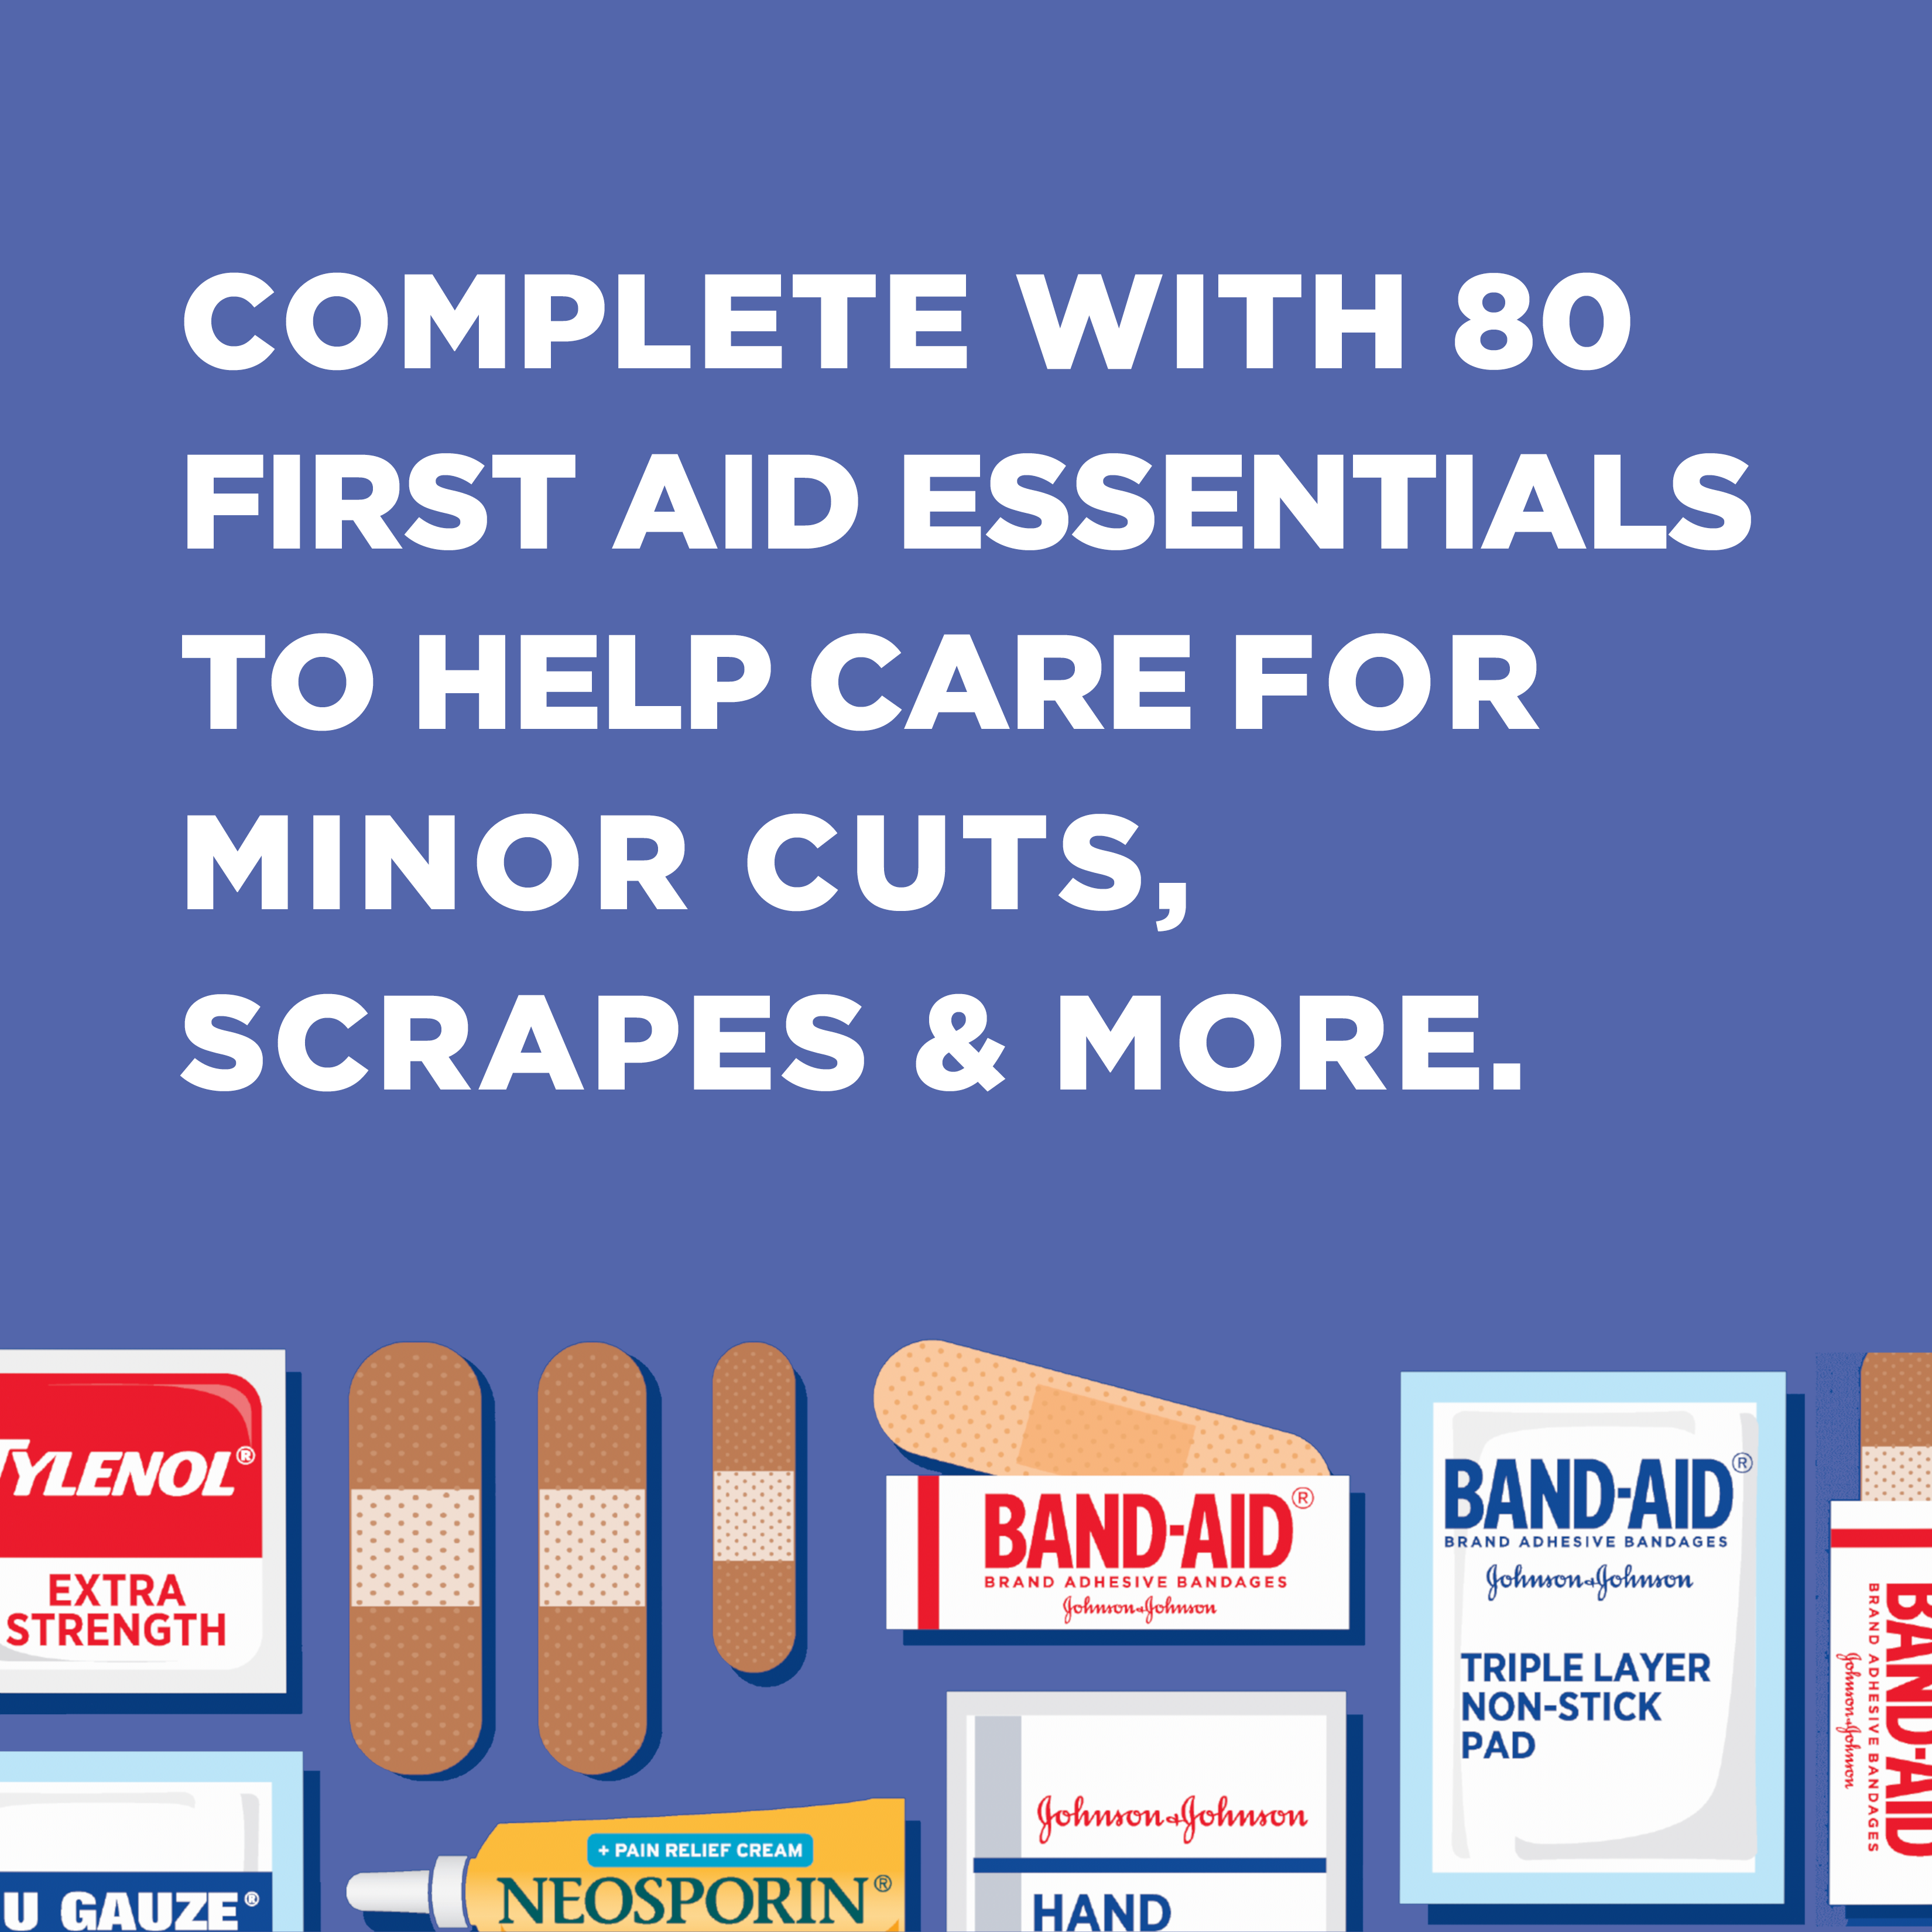 BAND-AID Bandages Travel Kit 8 Each (Pack of 2)